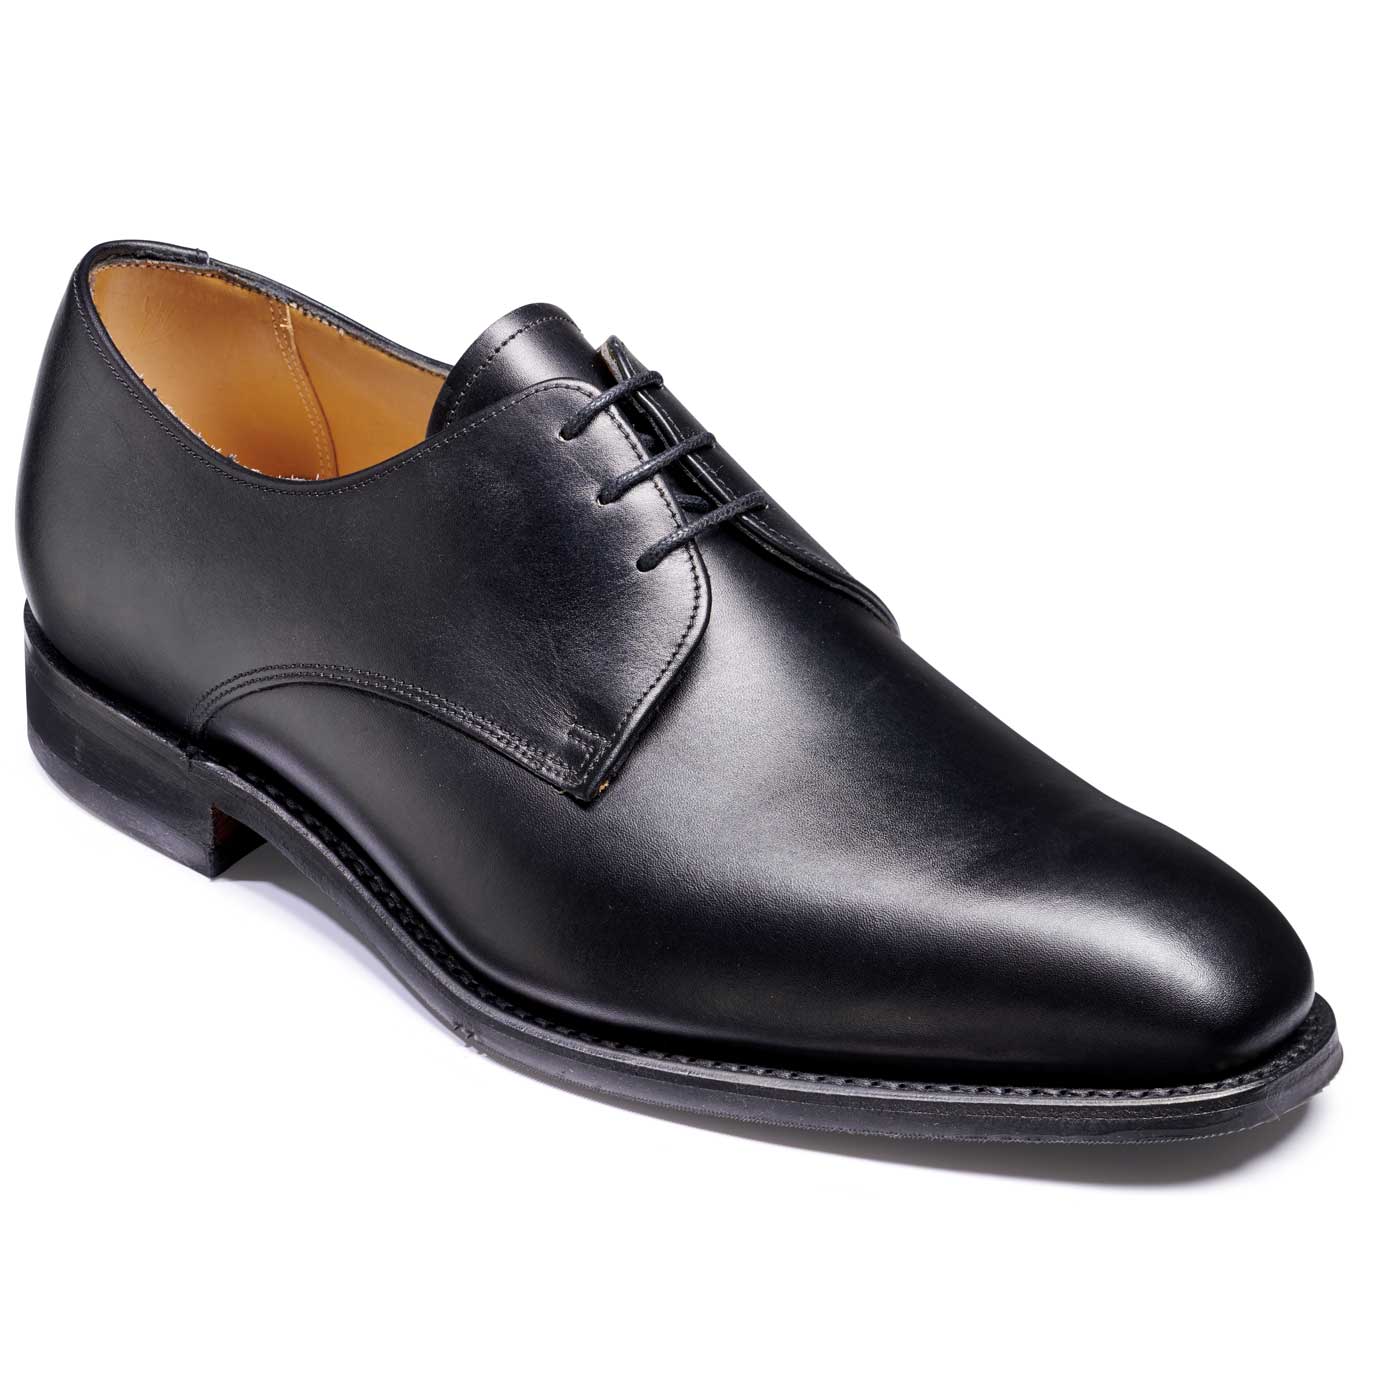 Barker St. Austell Shoes - Plain Fronted Derby - Black Calf